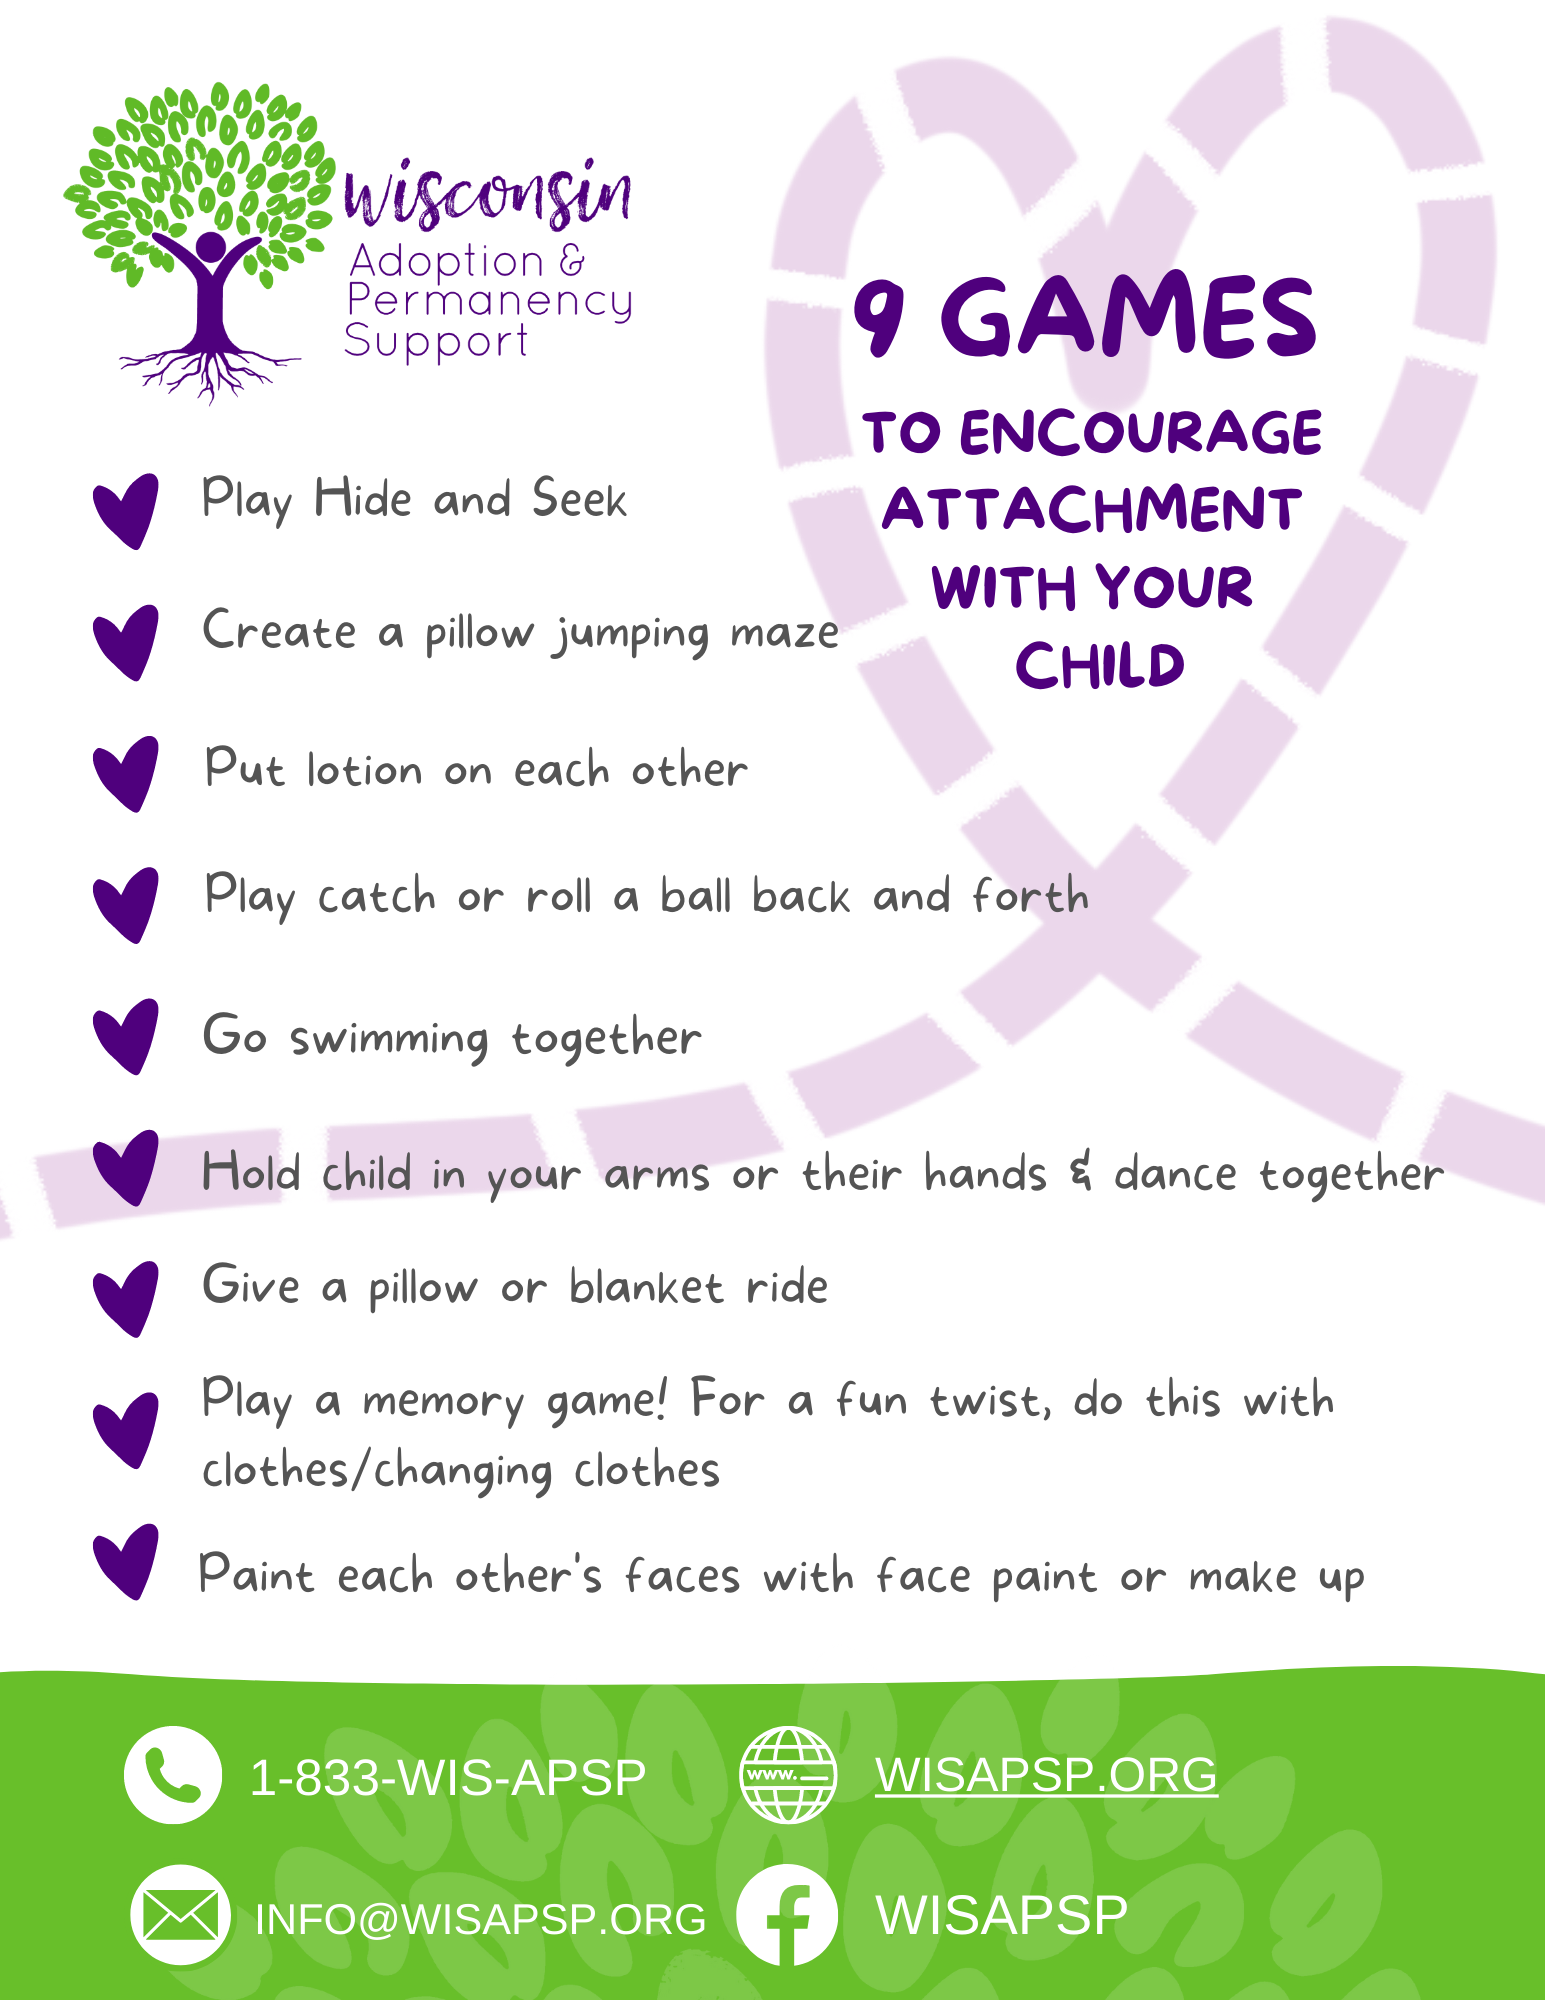 9 Games to Encourage Attachment